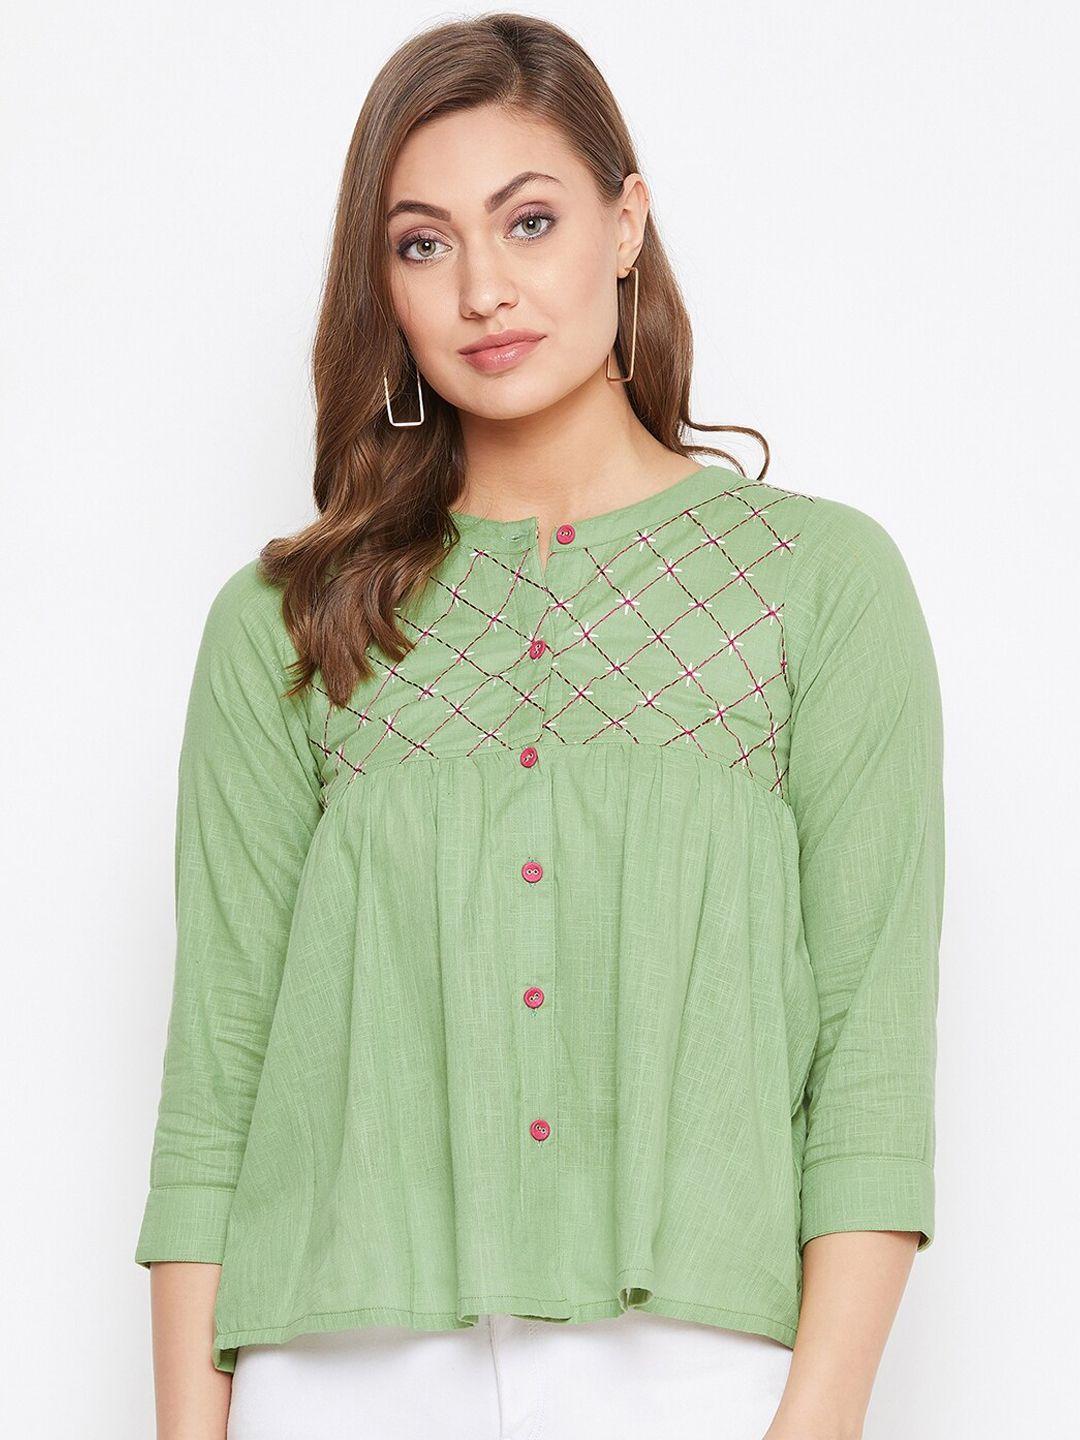 winered-women-green-embroidered-top